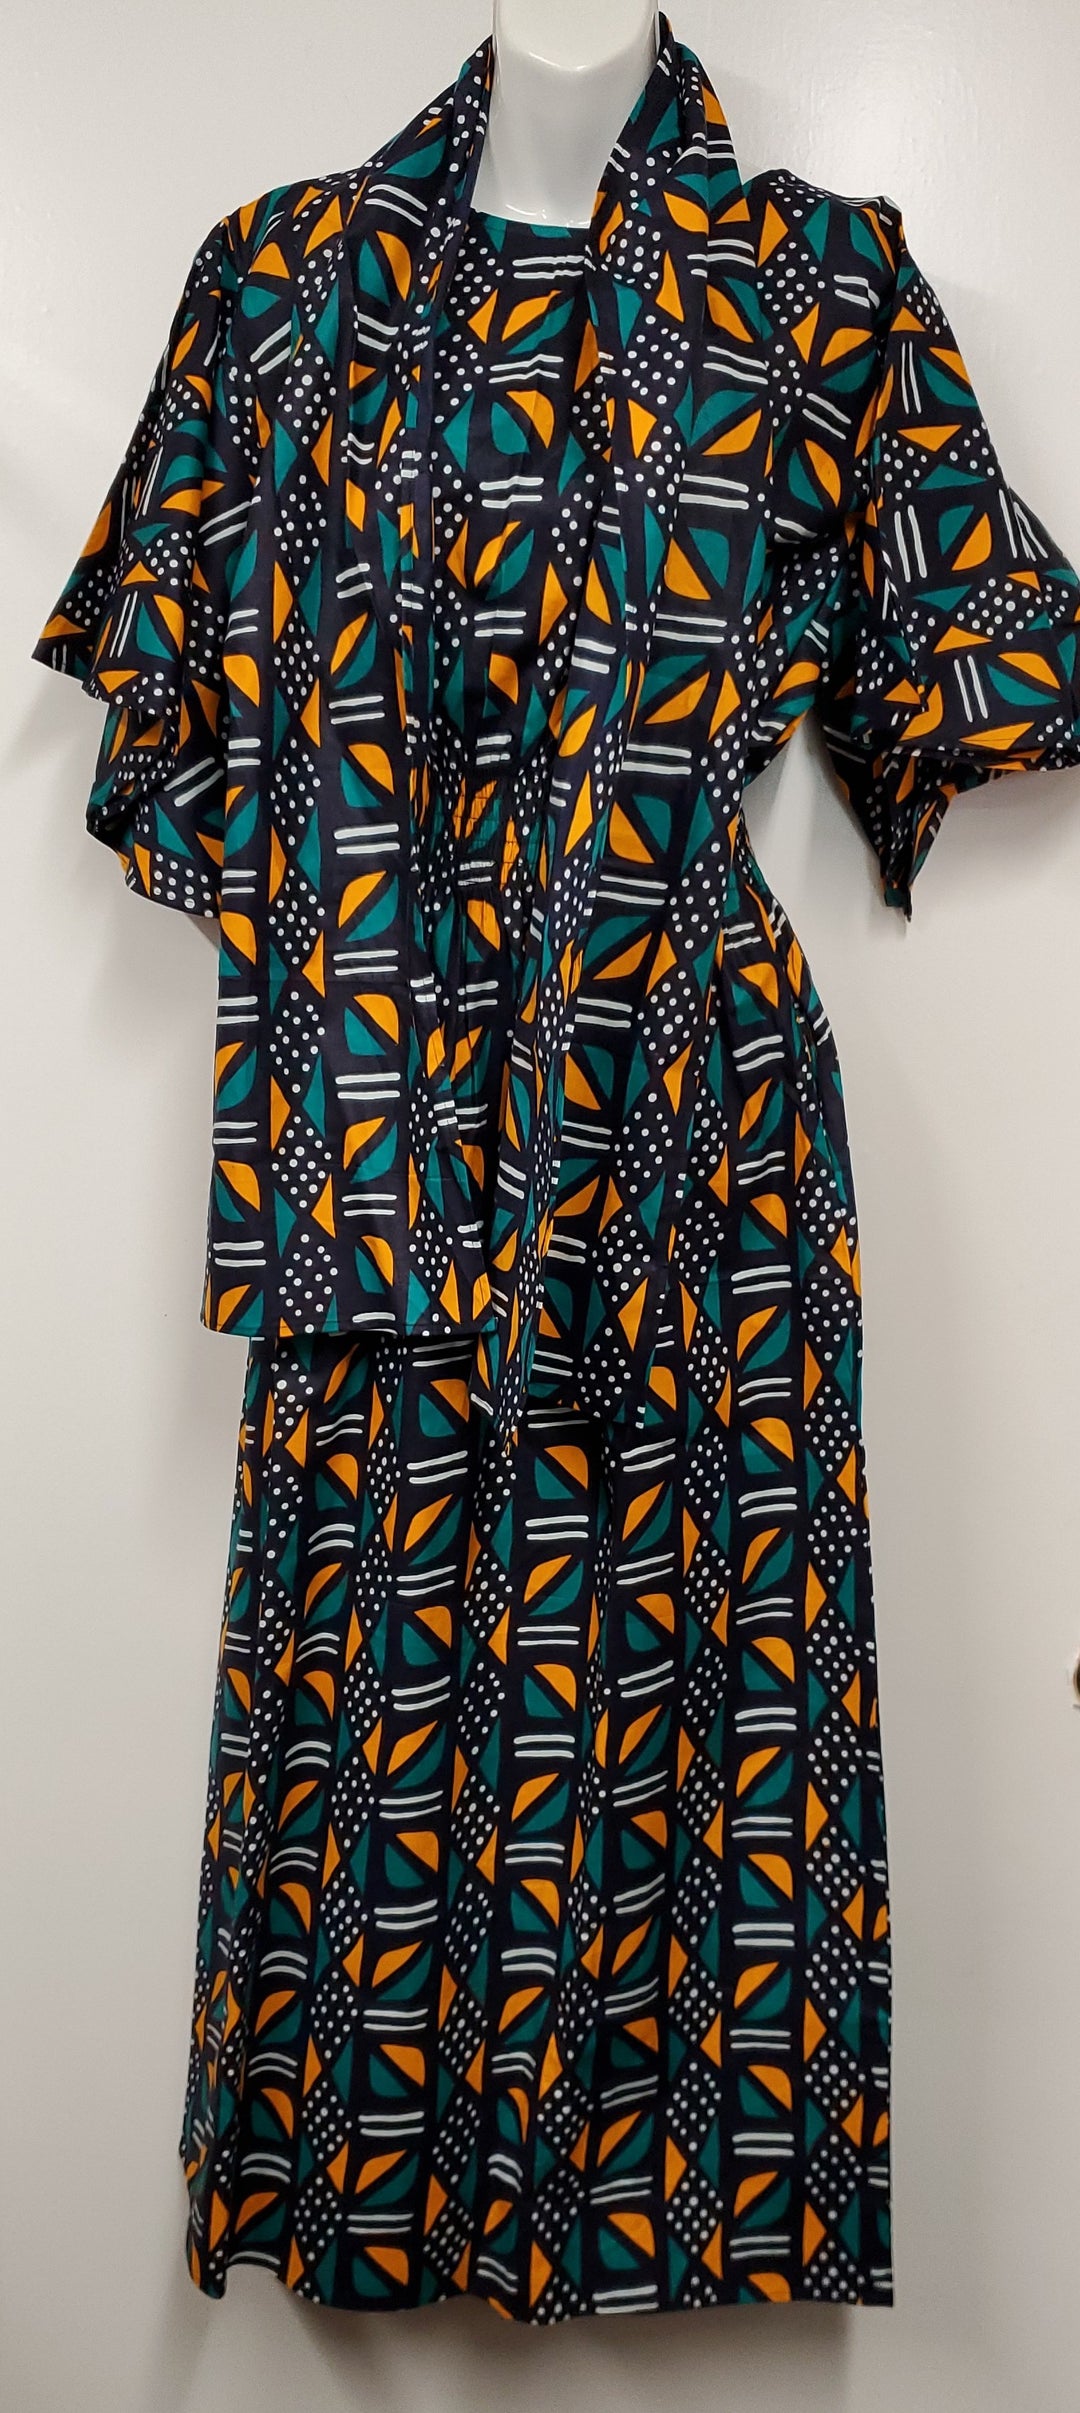 Ladies African Turquoise/Yellow Print Maxi Dress with Scarf